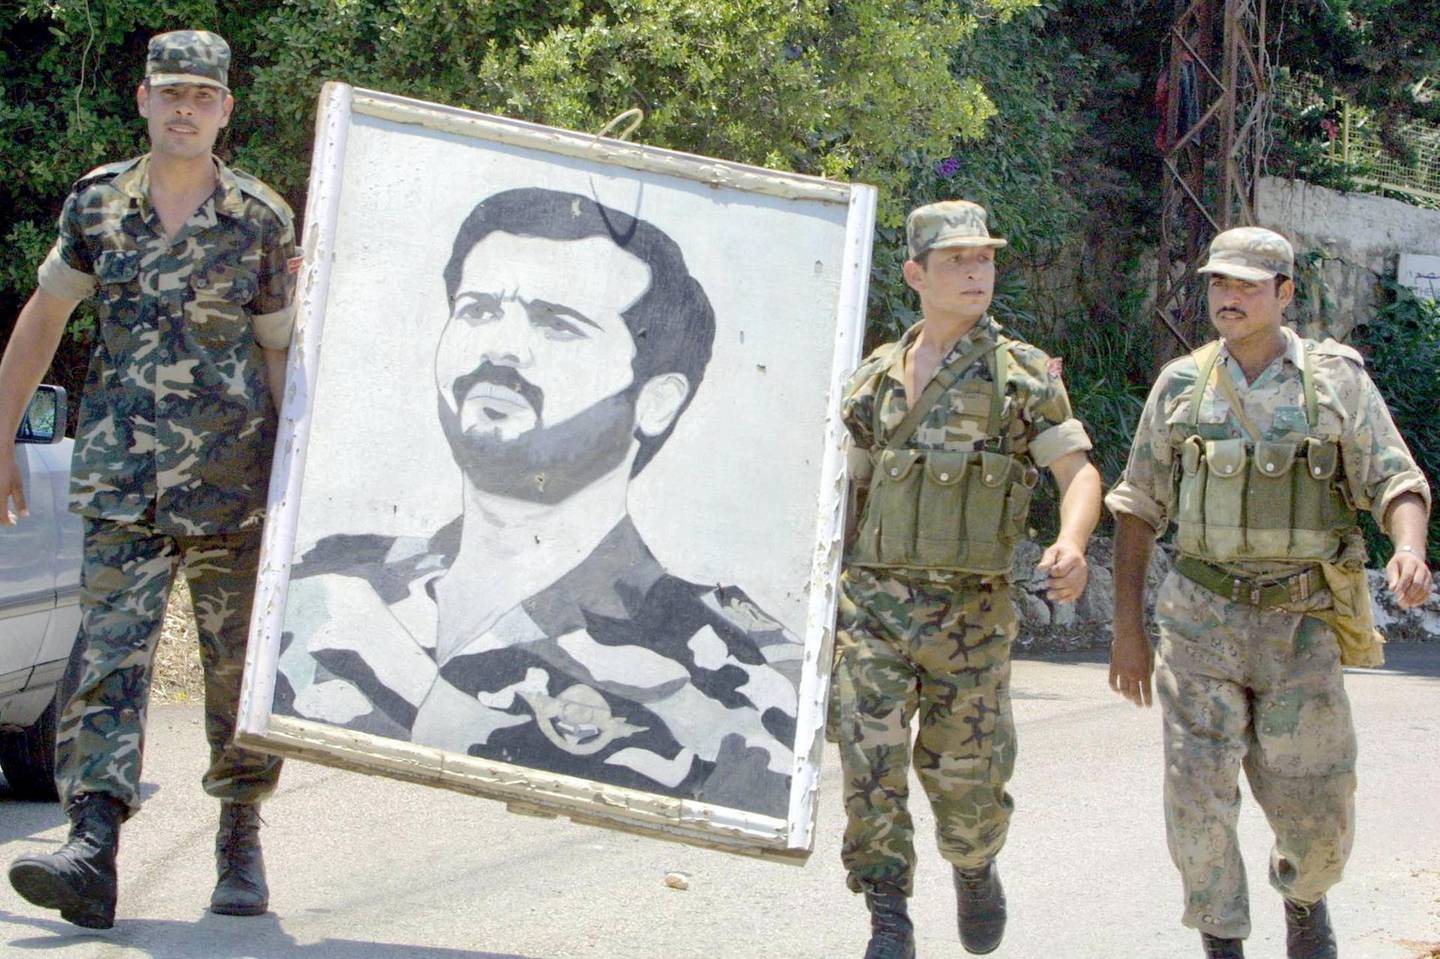 Syrian soldiers carry a portrait of Syrian president Bashar al-Assad's late brother, Bassel, as they dismantle one of their posts in Yarze on the Beirut-Damascus highway 14 June 2001. Syrian troops based in Beirut and areas close to the Lebanese capital began yesterday redeploying their forces in an operation scheduled to last several days. AFP PHOTO/Ramzi HAIDAR (Photo by RAMZI HAIDAR / AFP)